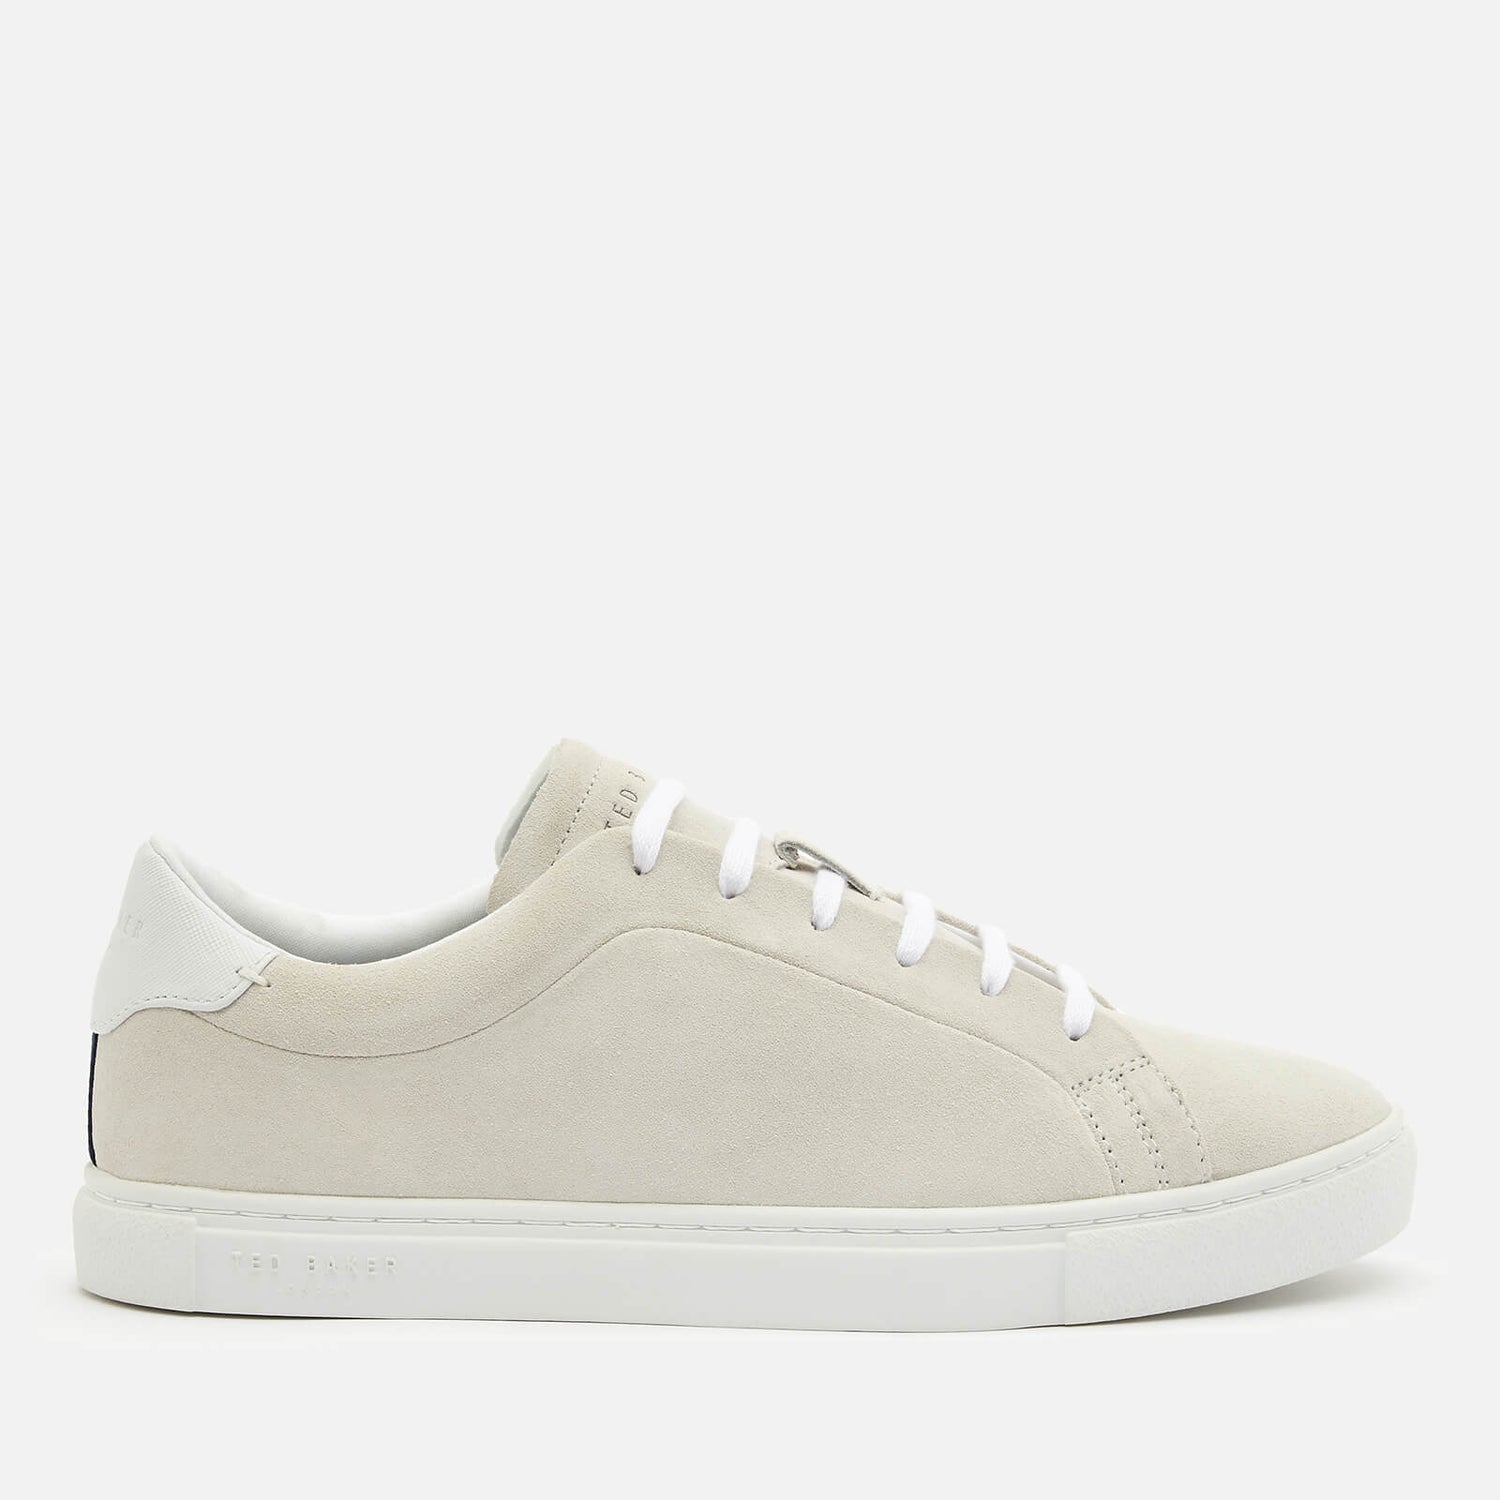 Ted Baker Men's Triloba Suede Cupsole Trainers - White